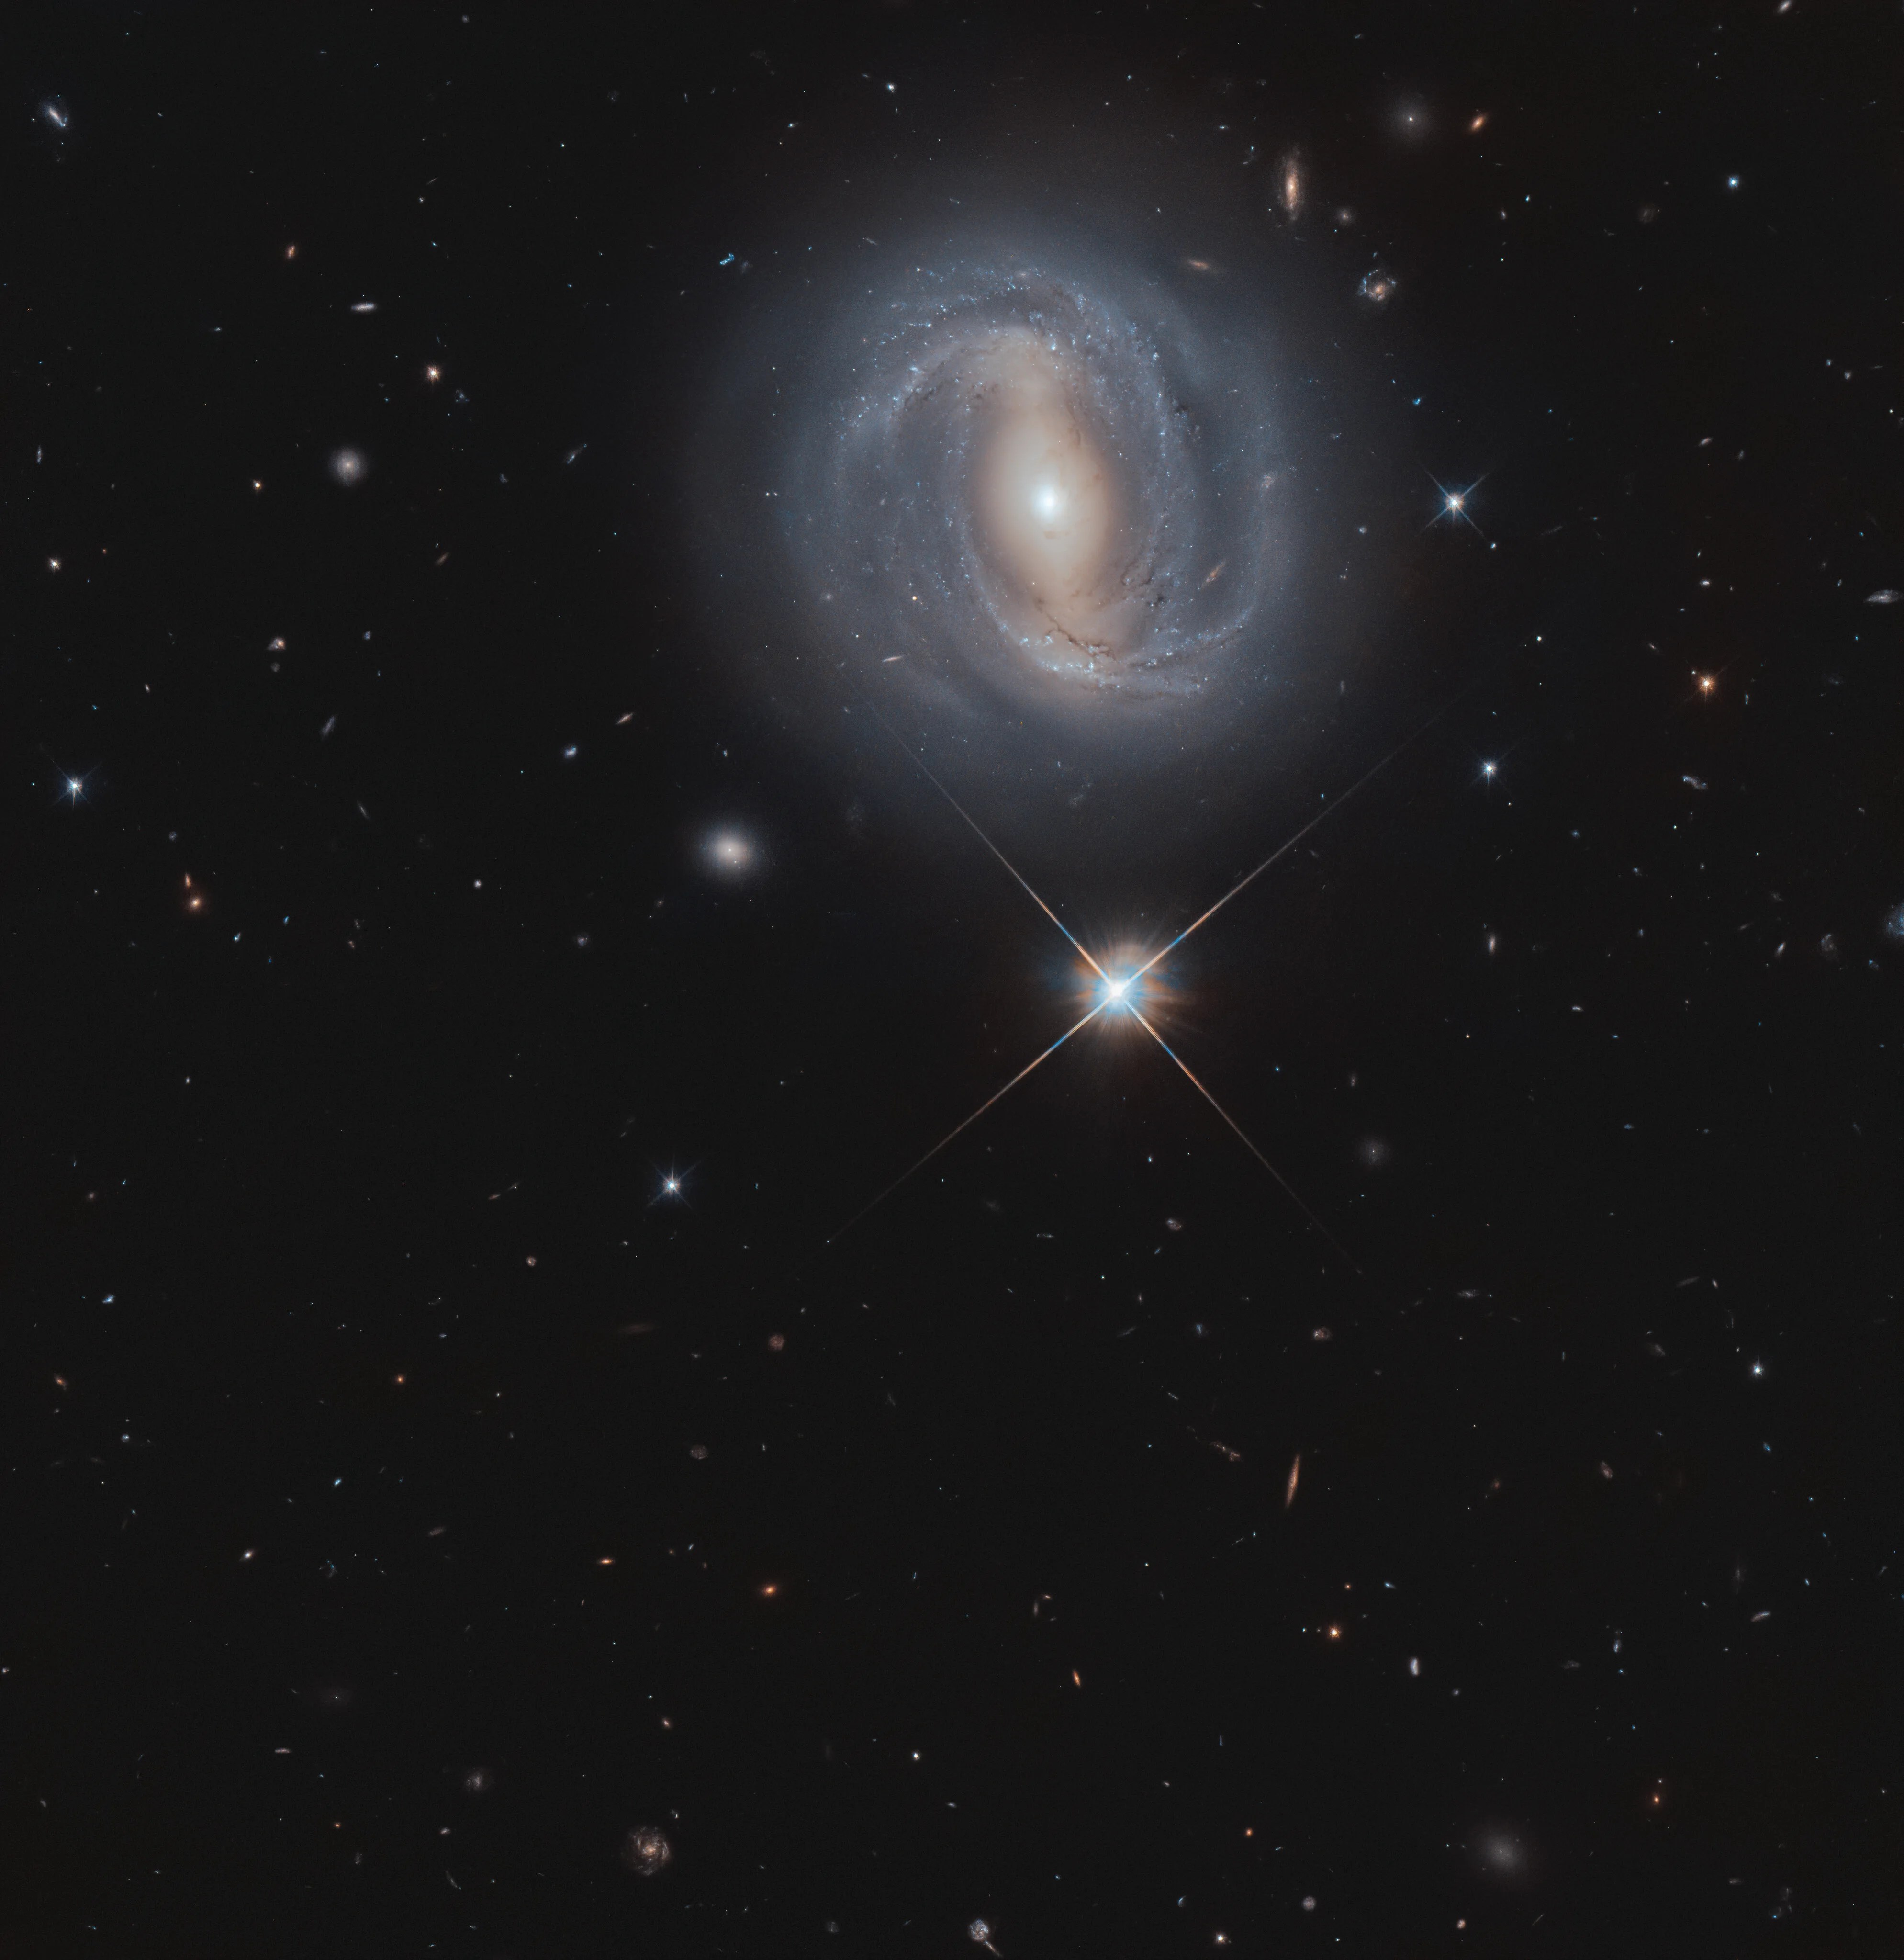 Bright spiral galaxy appearing above a bright star against the black background of space